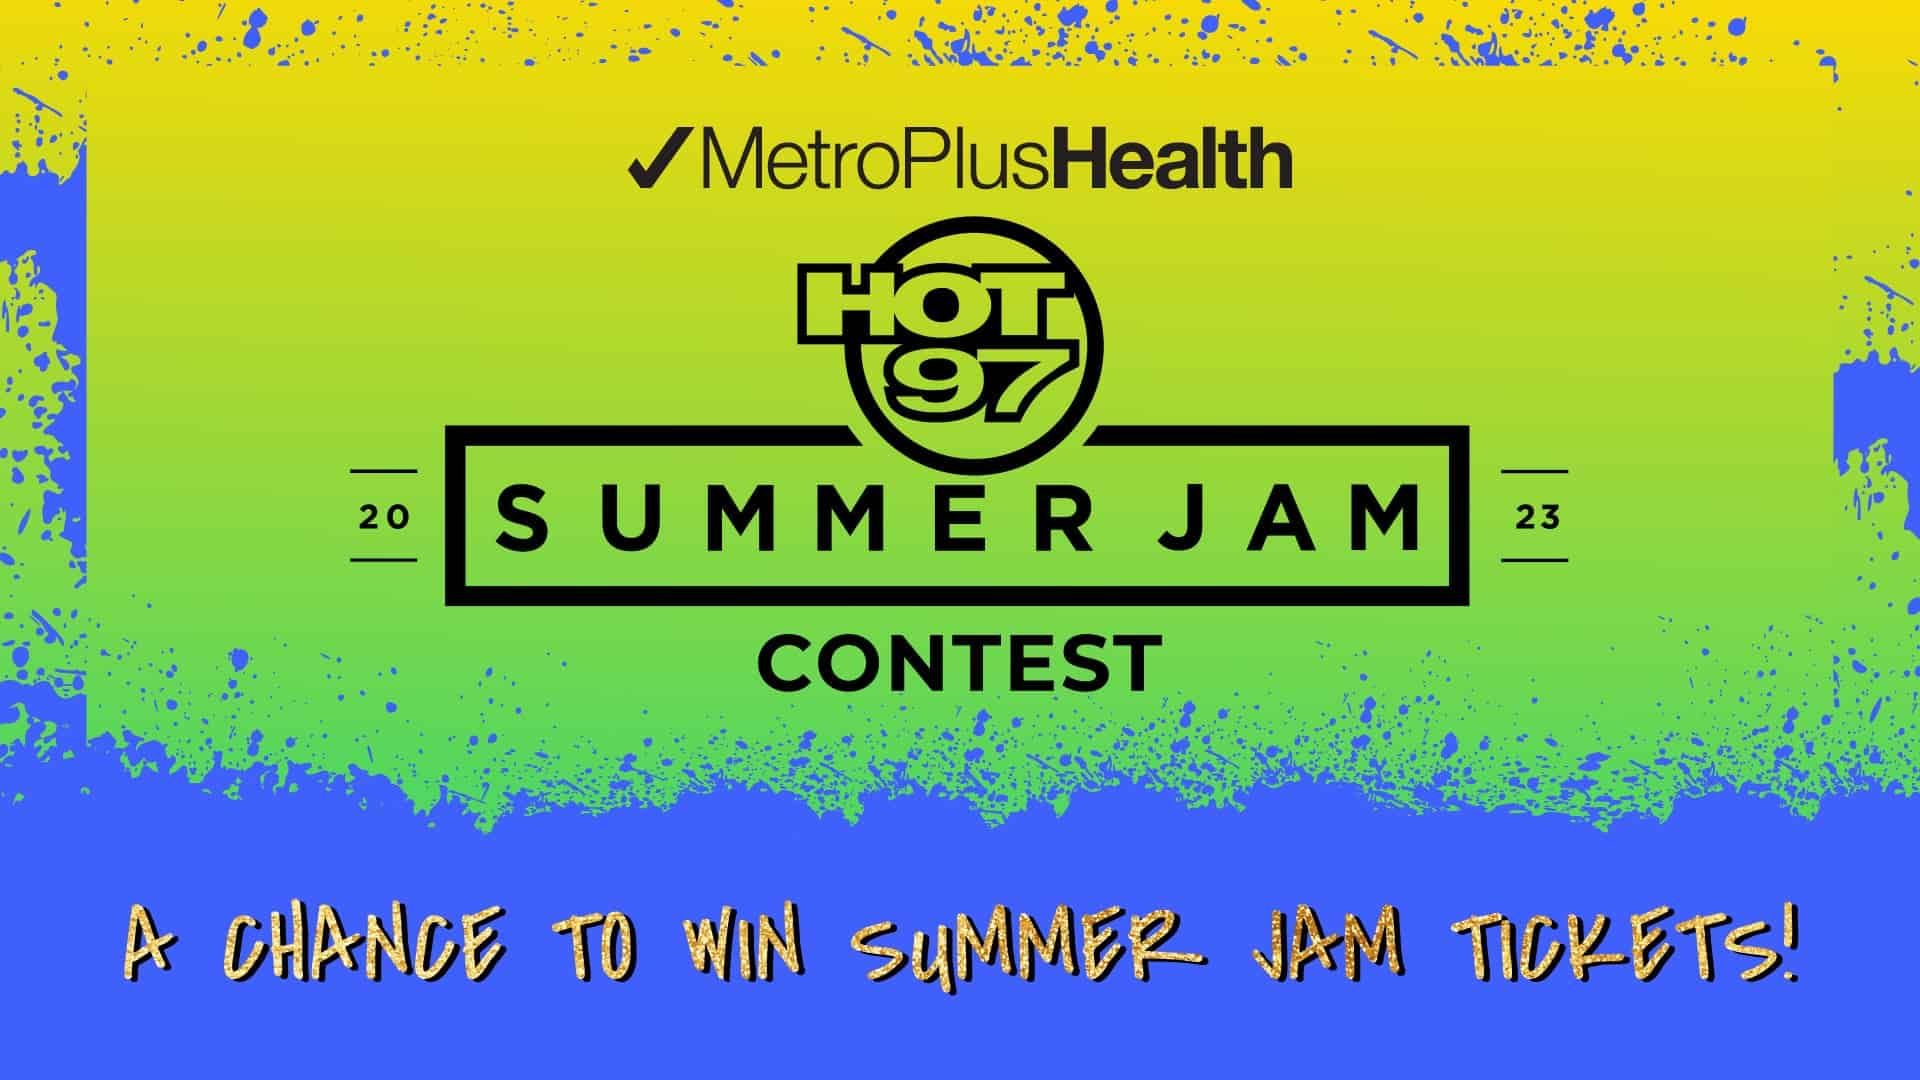 Metroplus Is Giving You Free Tickets To Summer Jam!